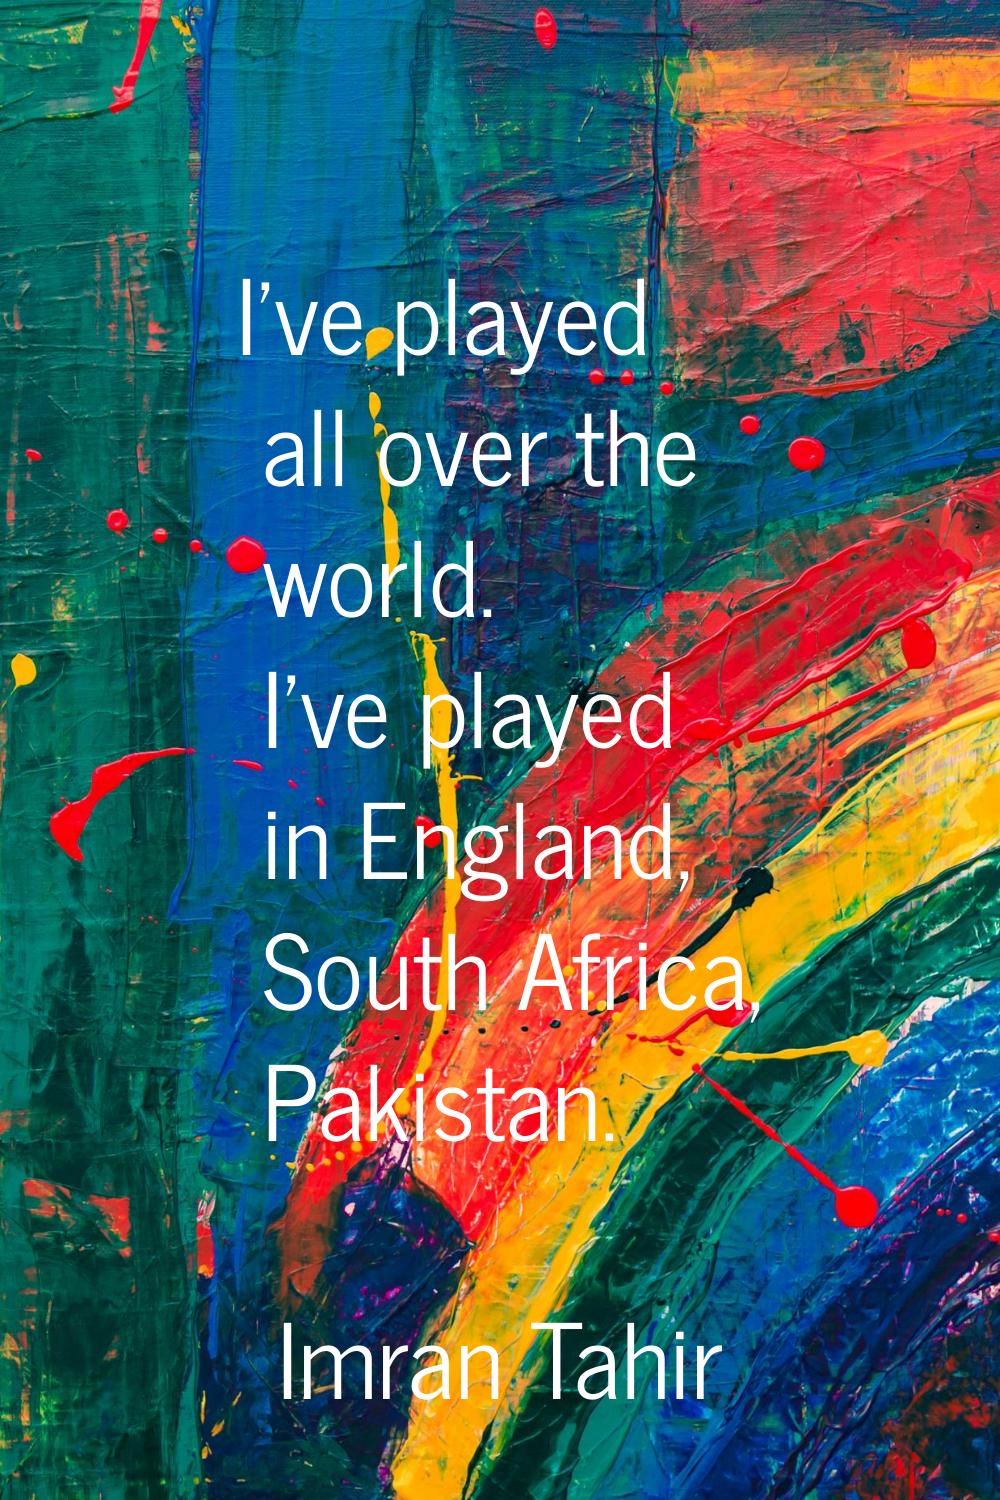 I've played all over the world. I've played in England, South Africa, Pakistan.